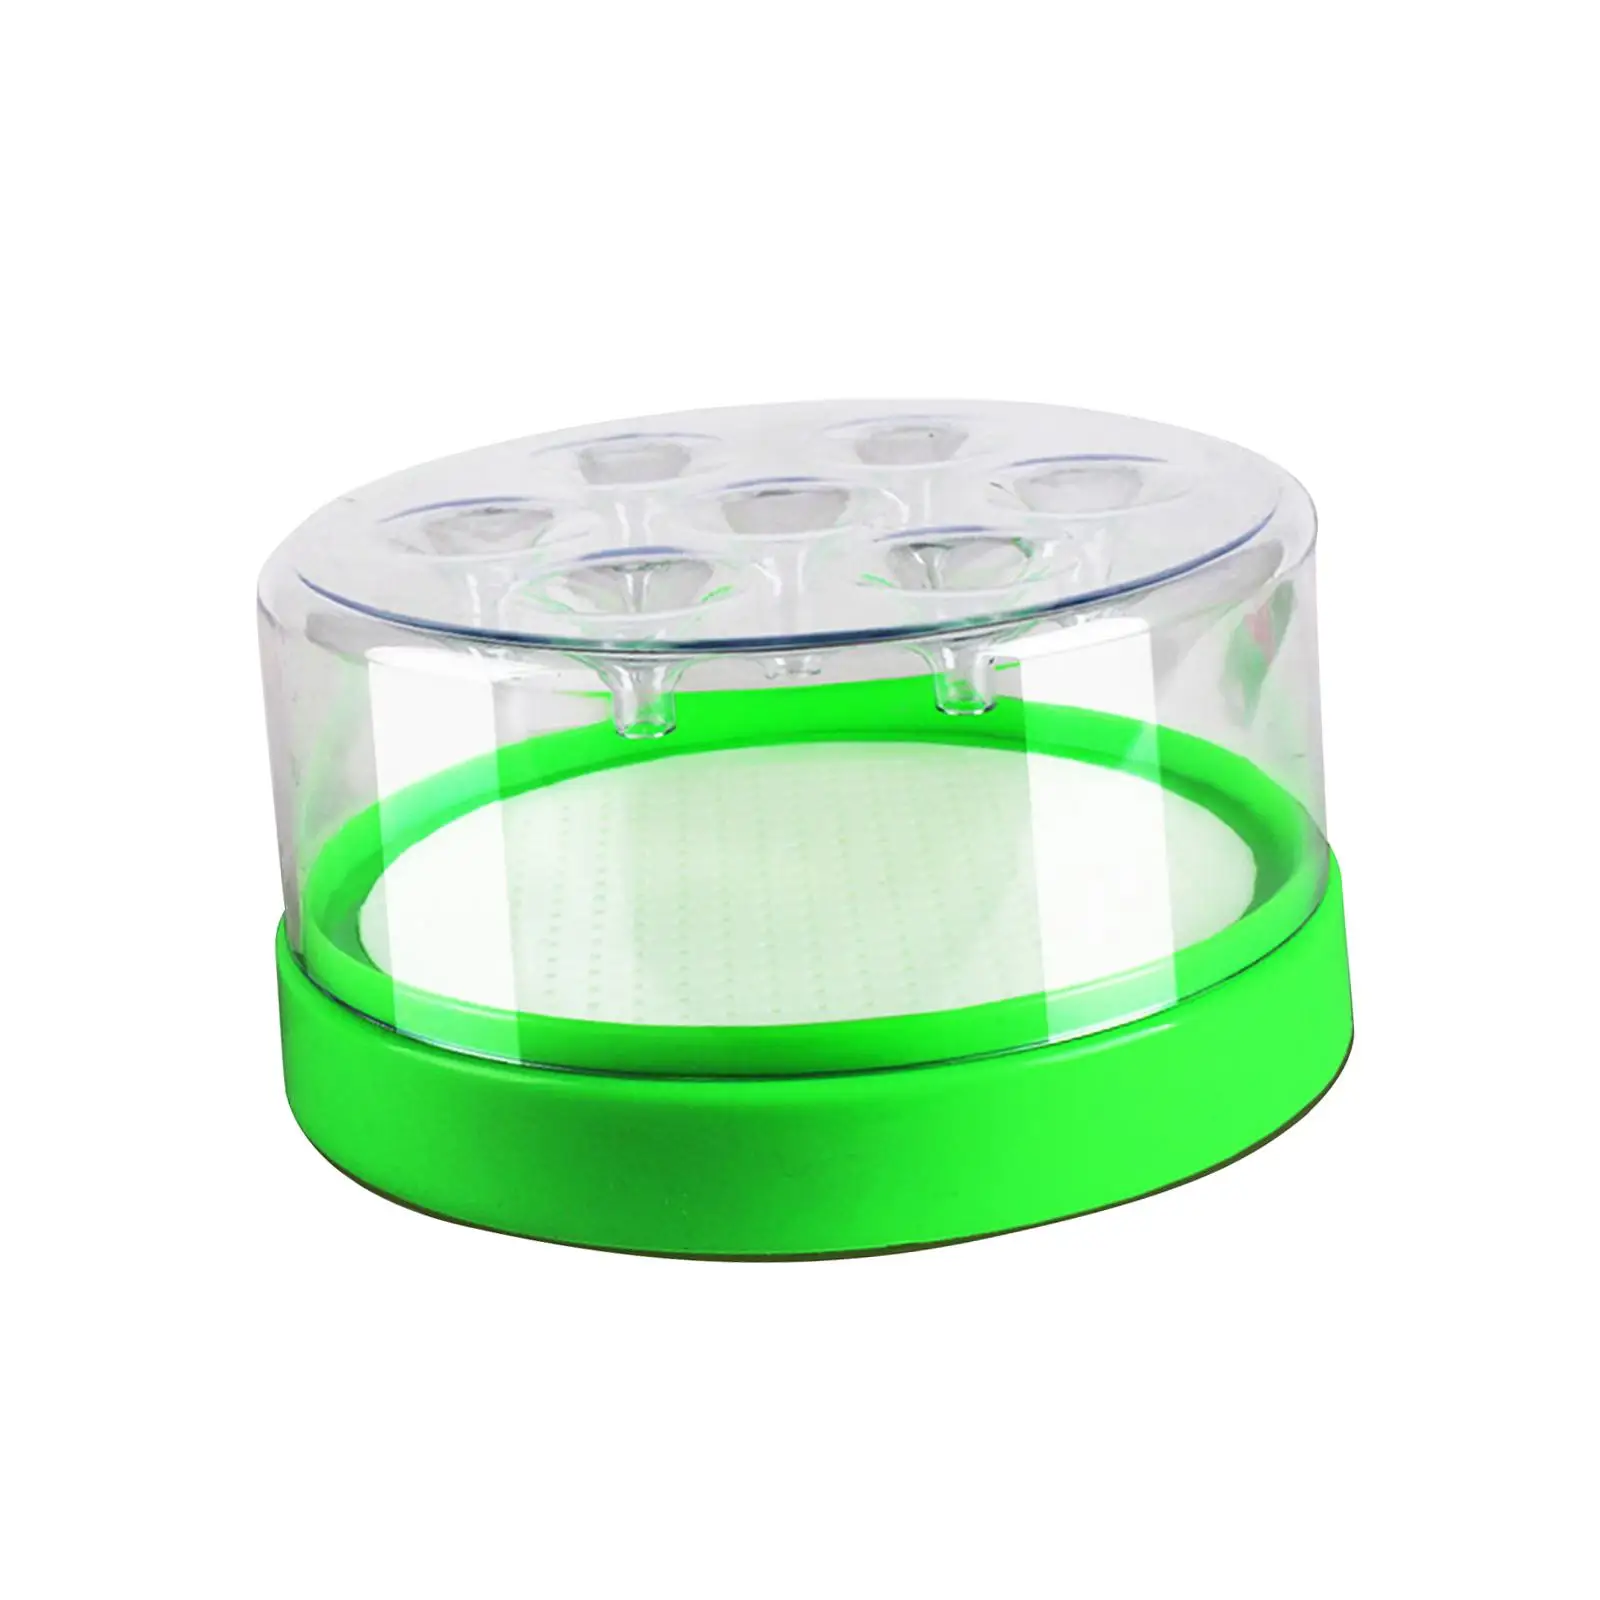 Fly Catching Cage Transparent Effective Fly Traps Fly Catcher Fly Repellence for Living Room Farm Bedroom Restaurant